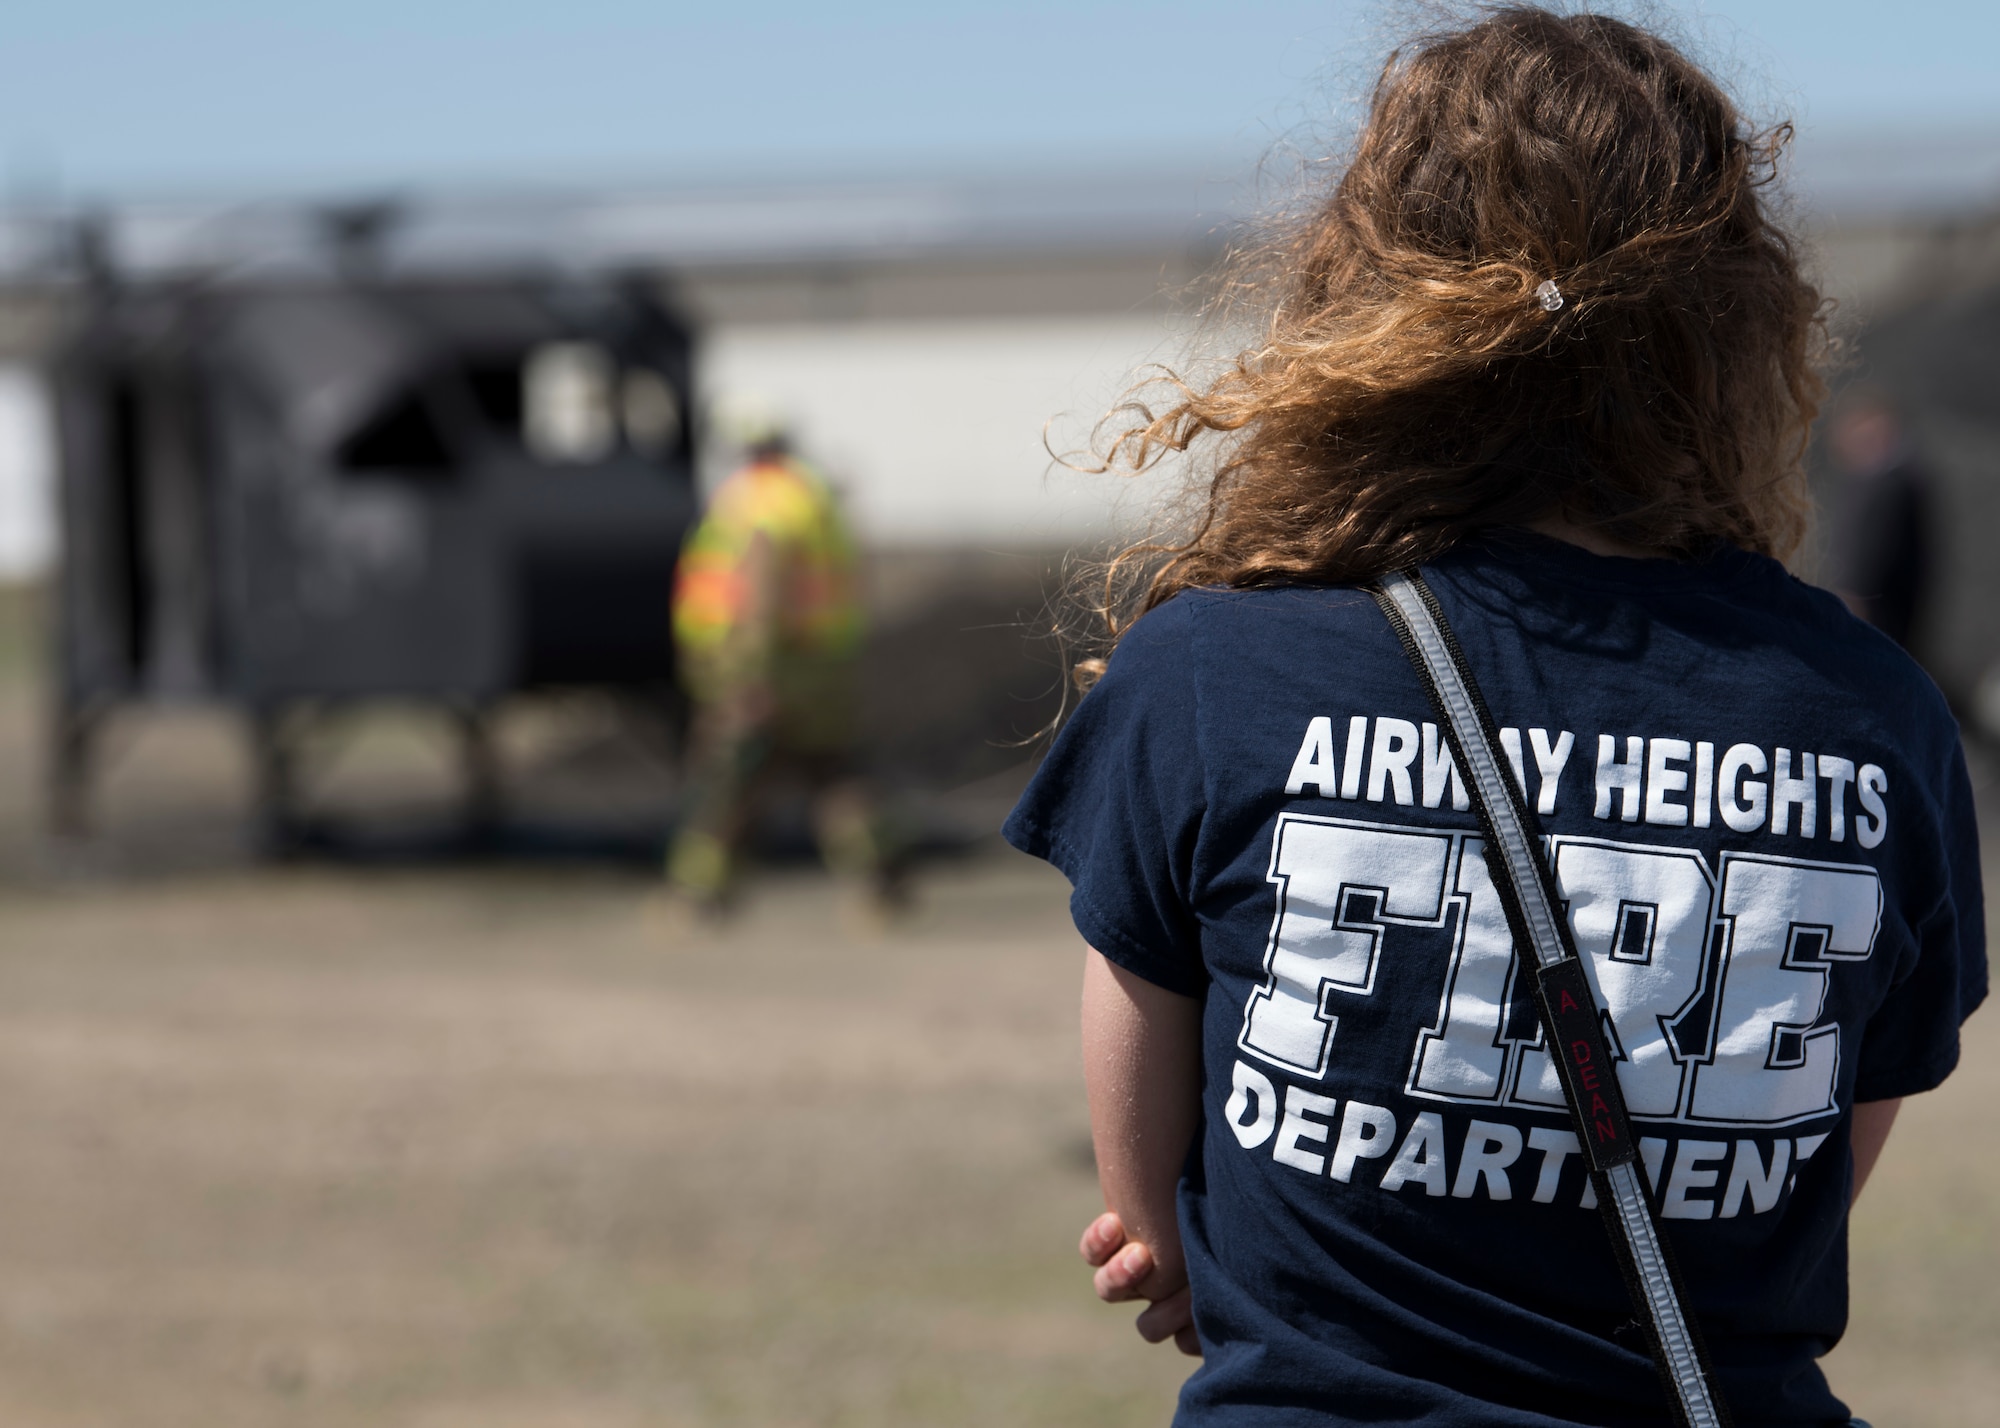 A firefighter from the Airway Heights Fire Department observes preparations for a Major Accident Response Exercise drill near Fairchild Air Force Base, Washington, May 9, 2019.